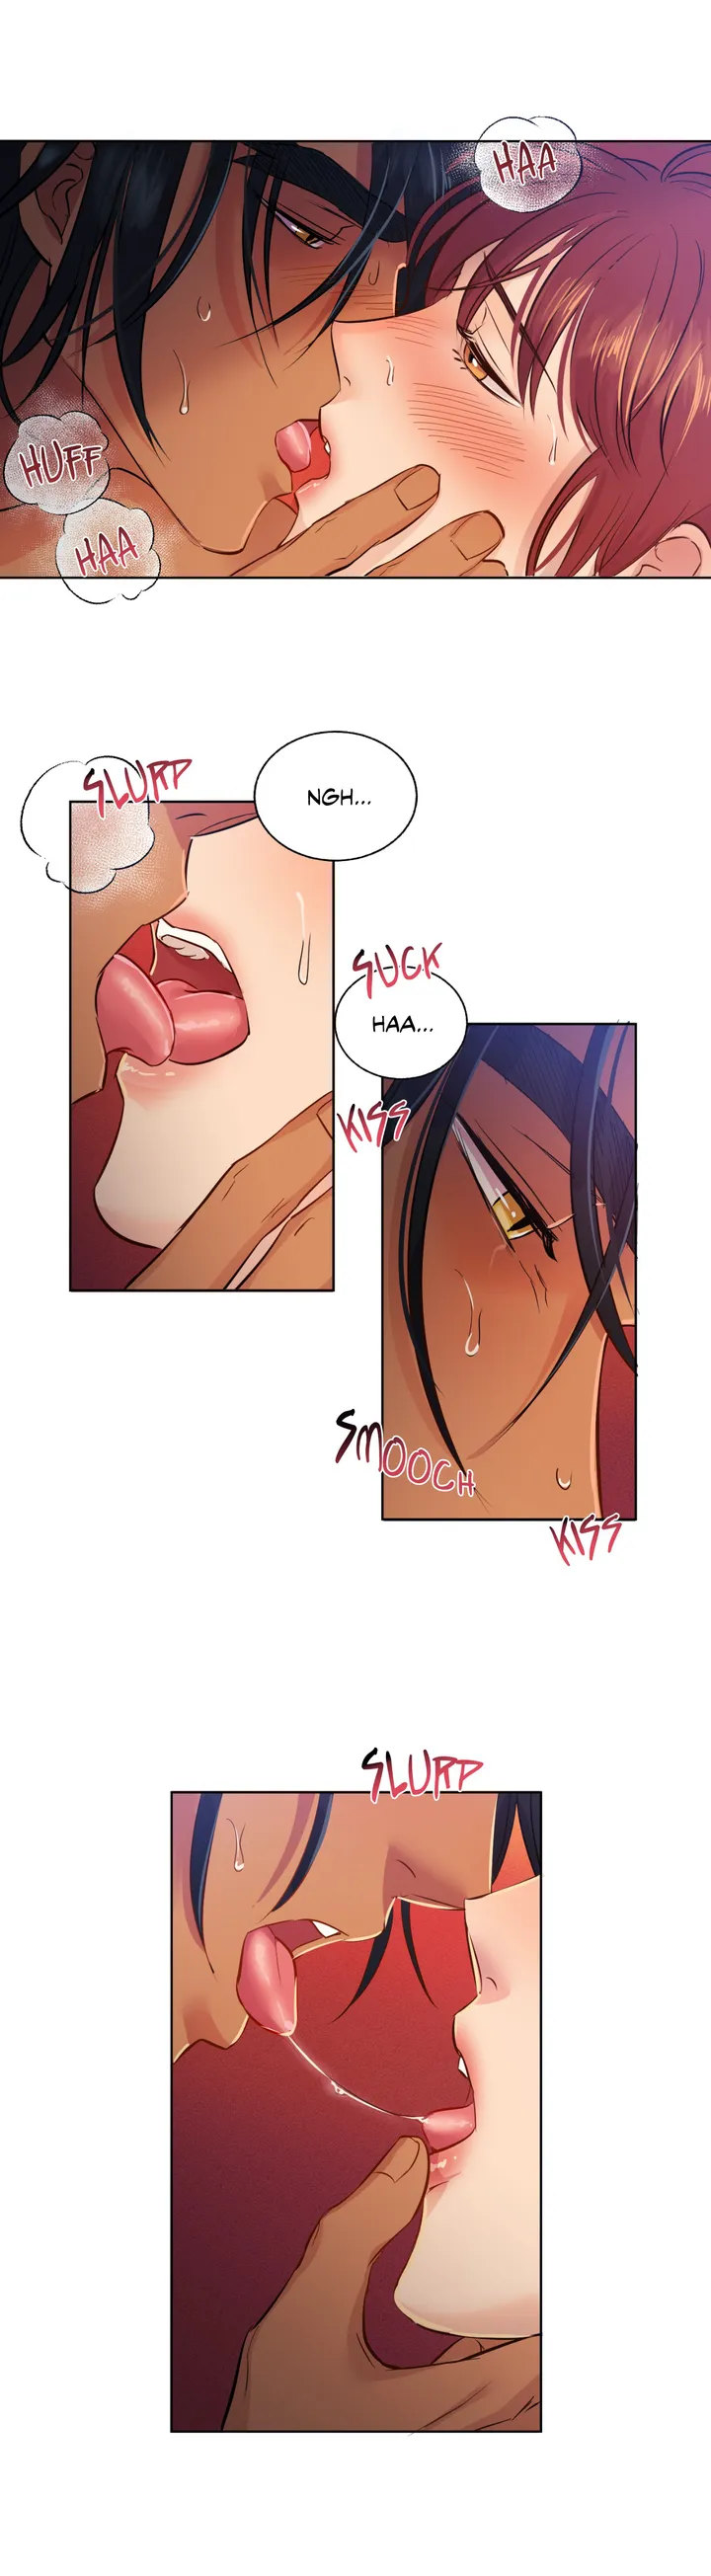 Hana’s Demons of Lust - Chapter 1 Page 4